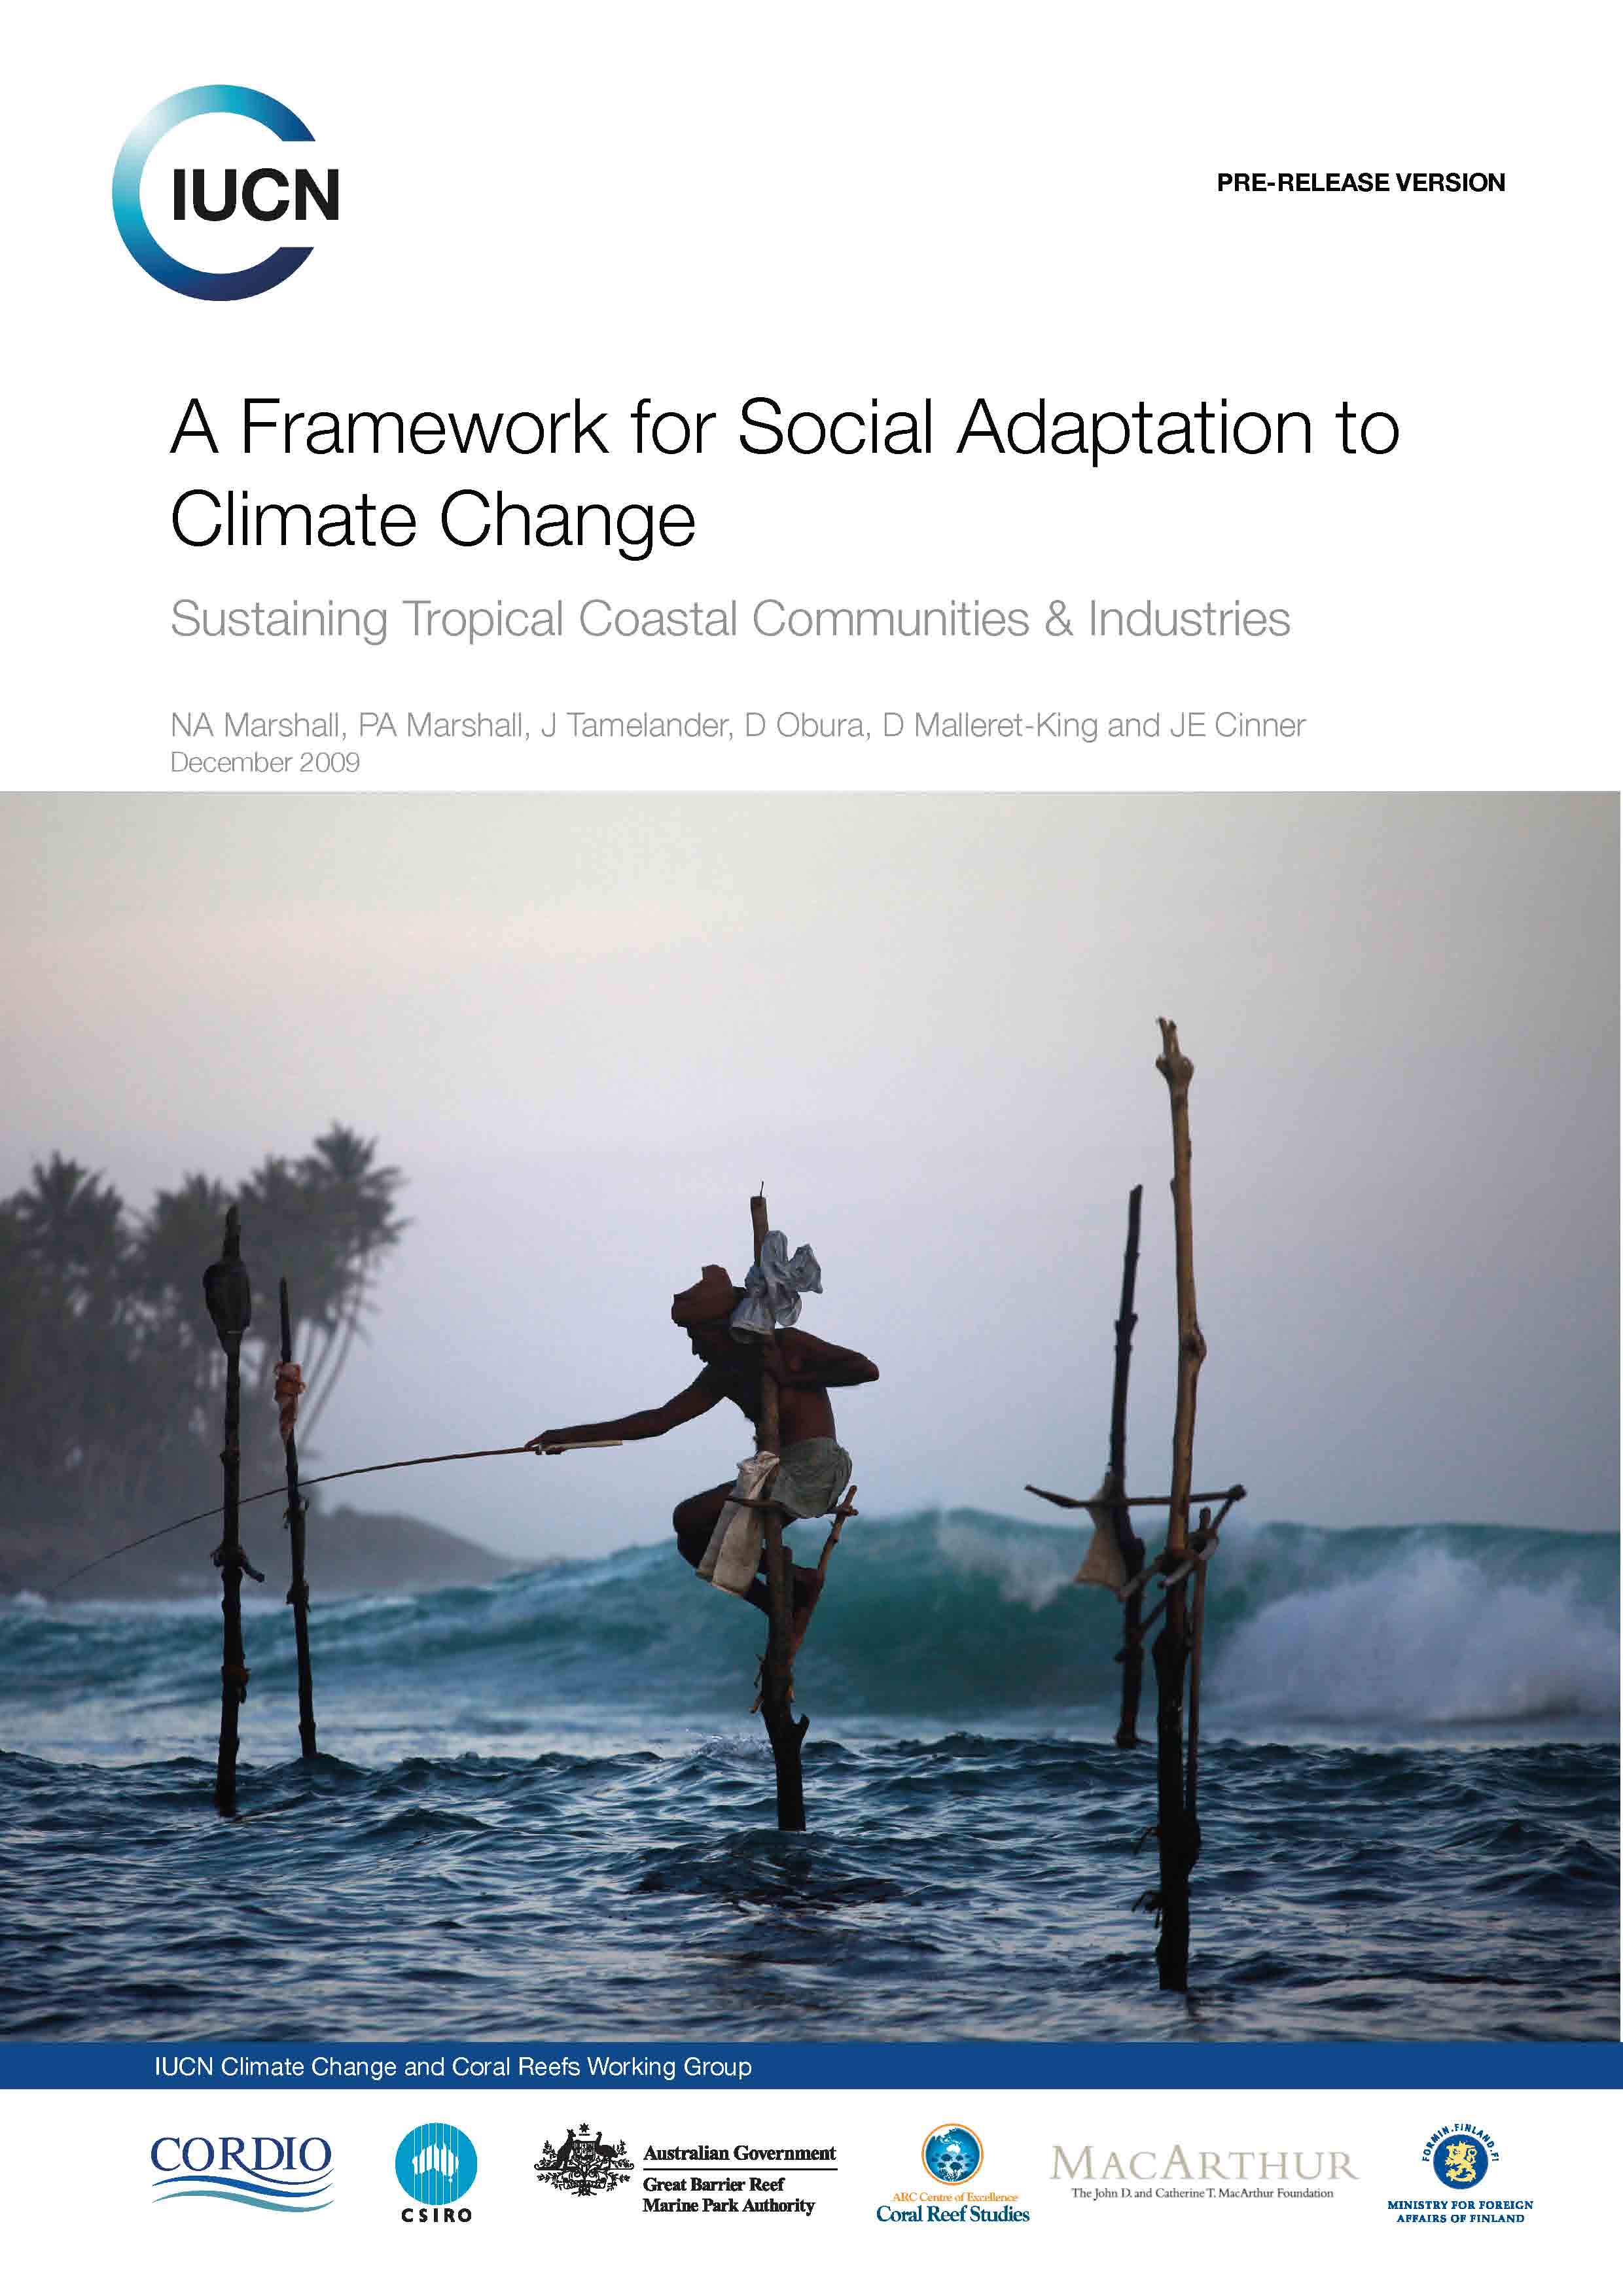 A Framework for Social Adaptation to Climate Change IUCN